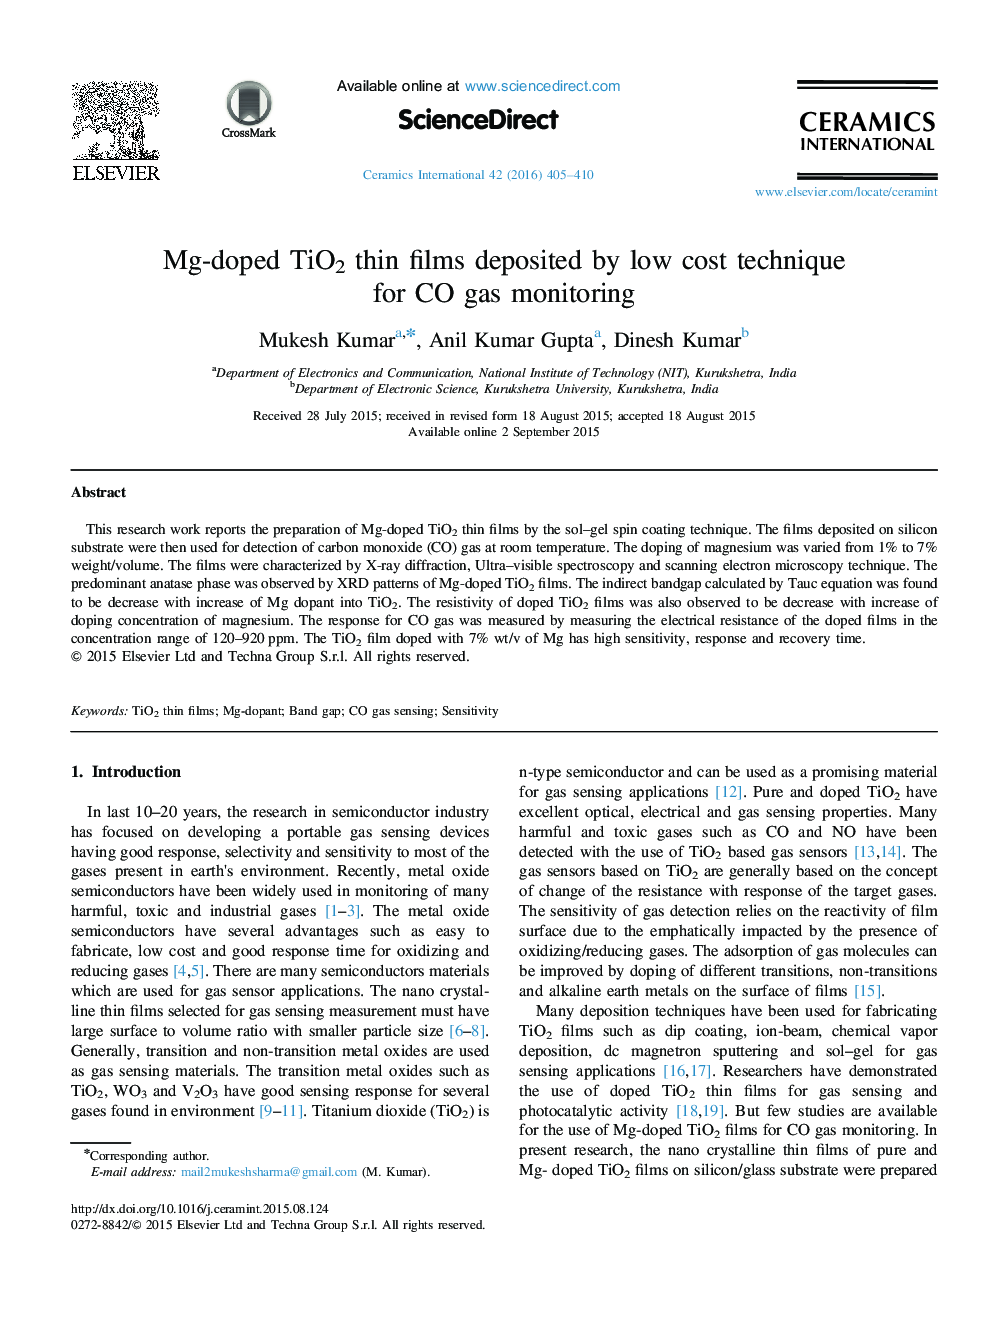 Mg-doped TiO2 thin films deposited by low cost technique for CO gas monitoring